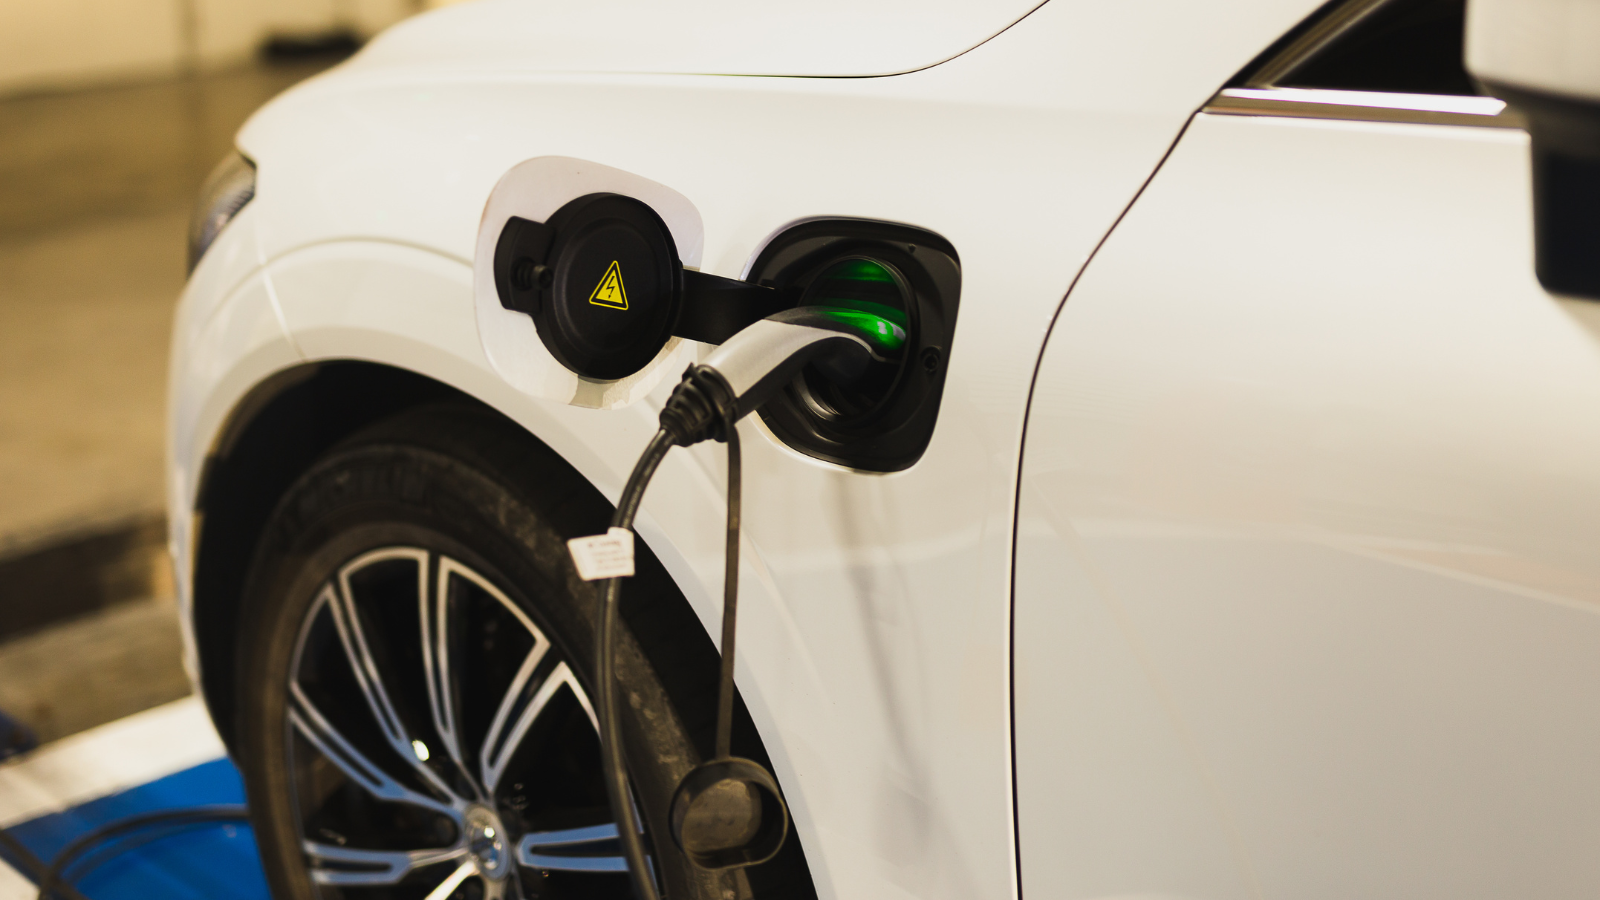 Bills expanding state electric vehicle infrastructure signed into law